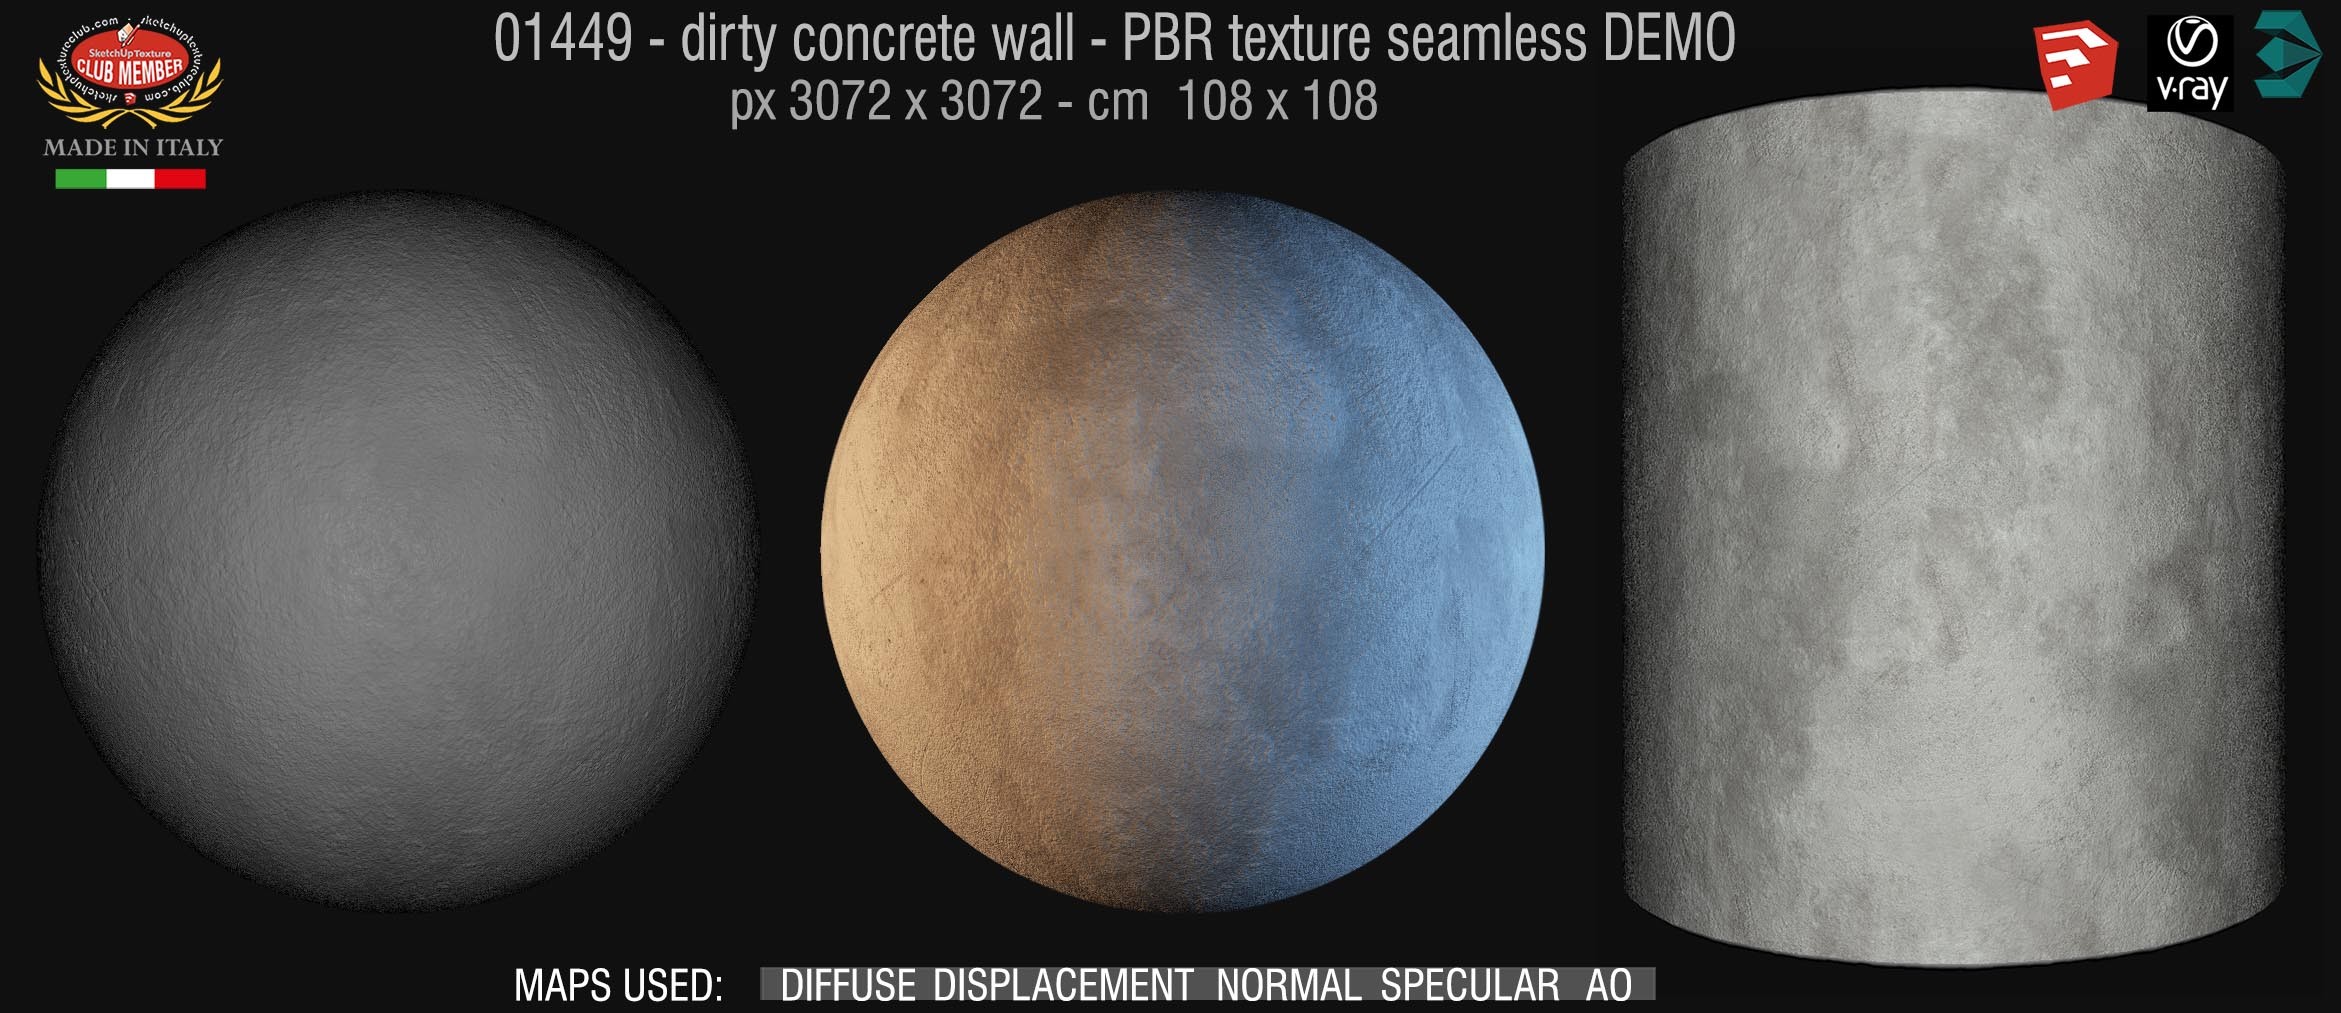 01449 Concrete bare dirty wall PBR texture seamless DEMO